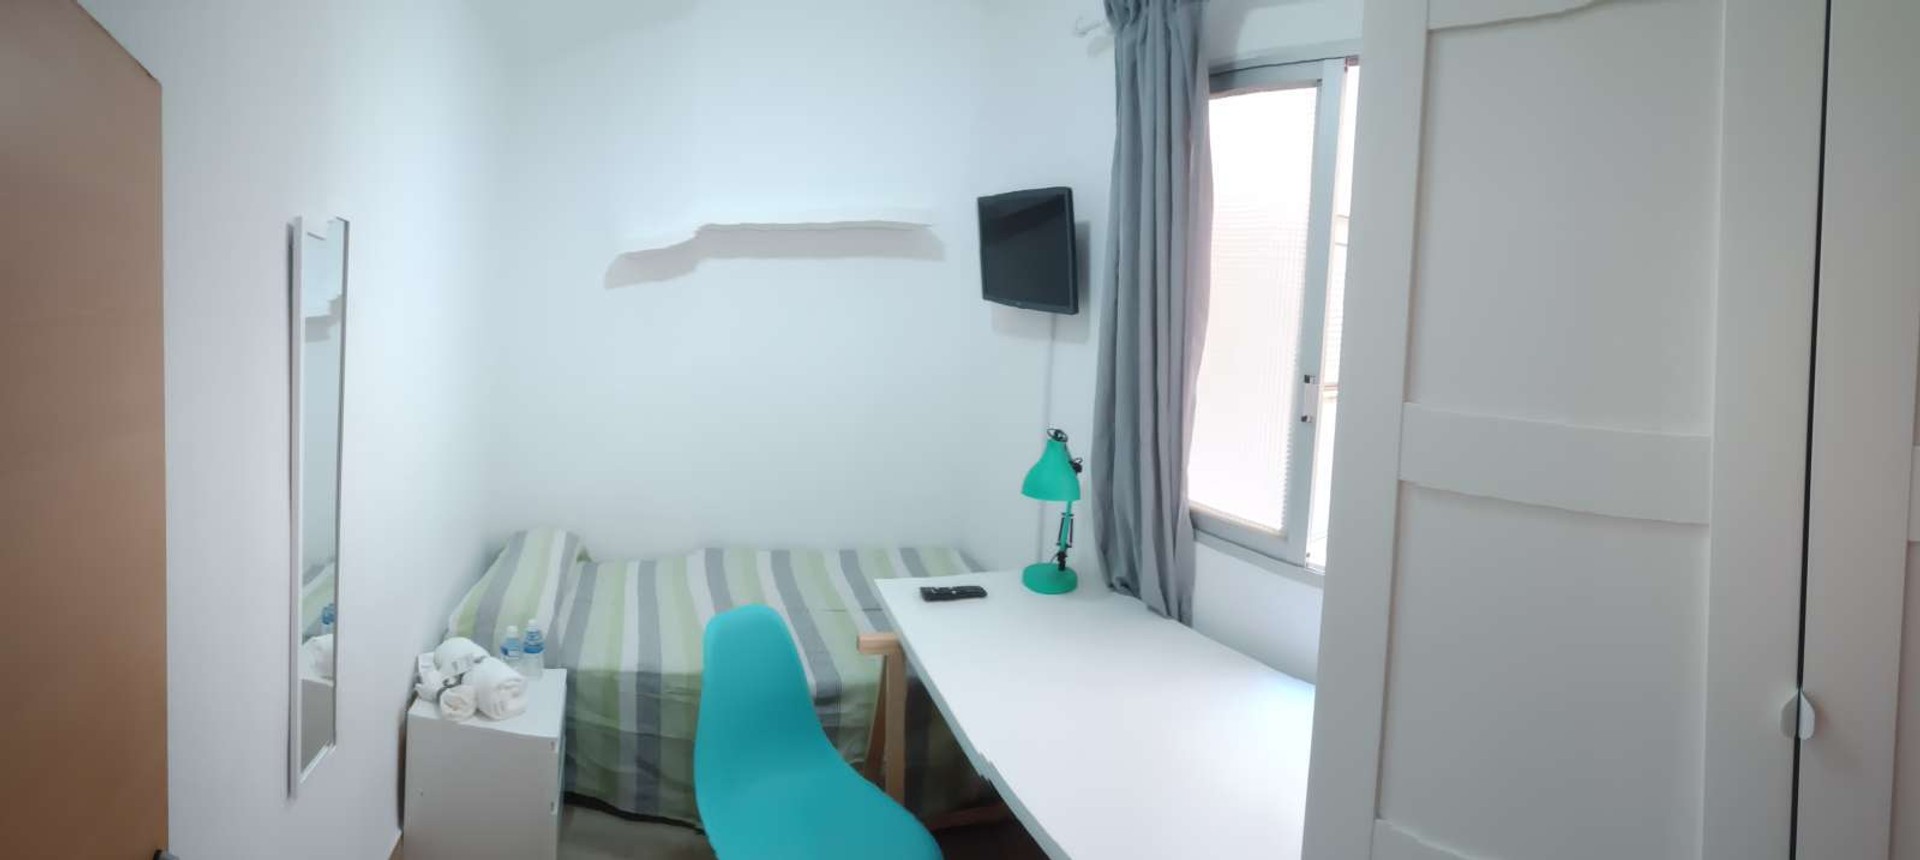 Room for rent in a shared flat in almeria